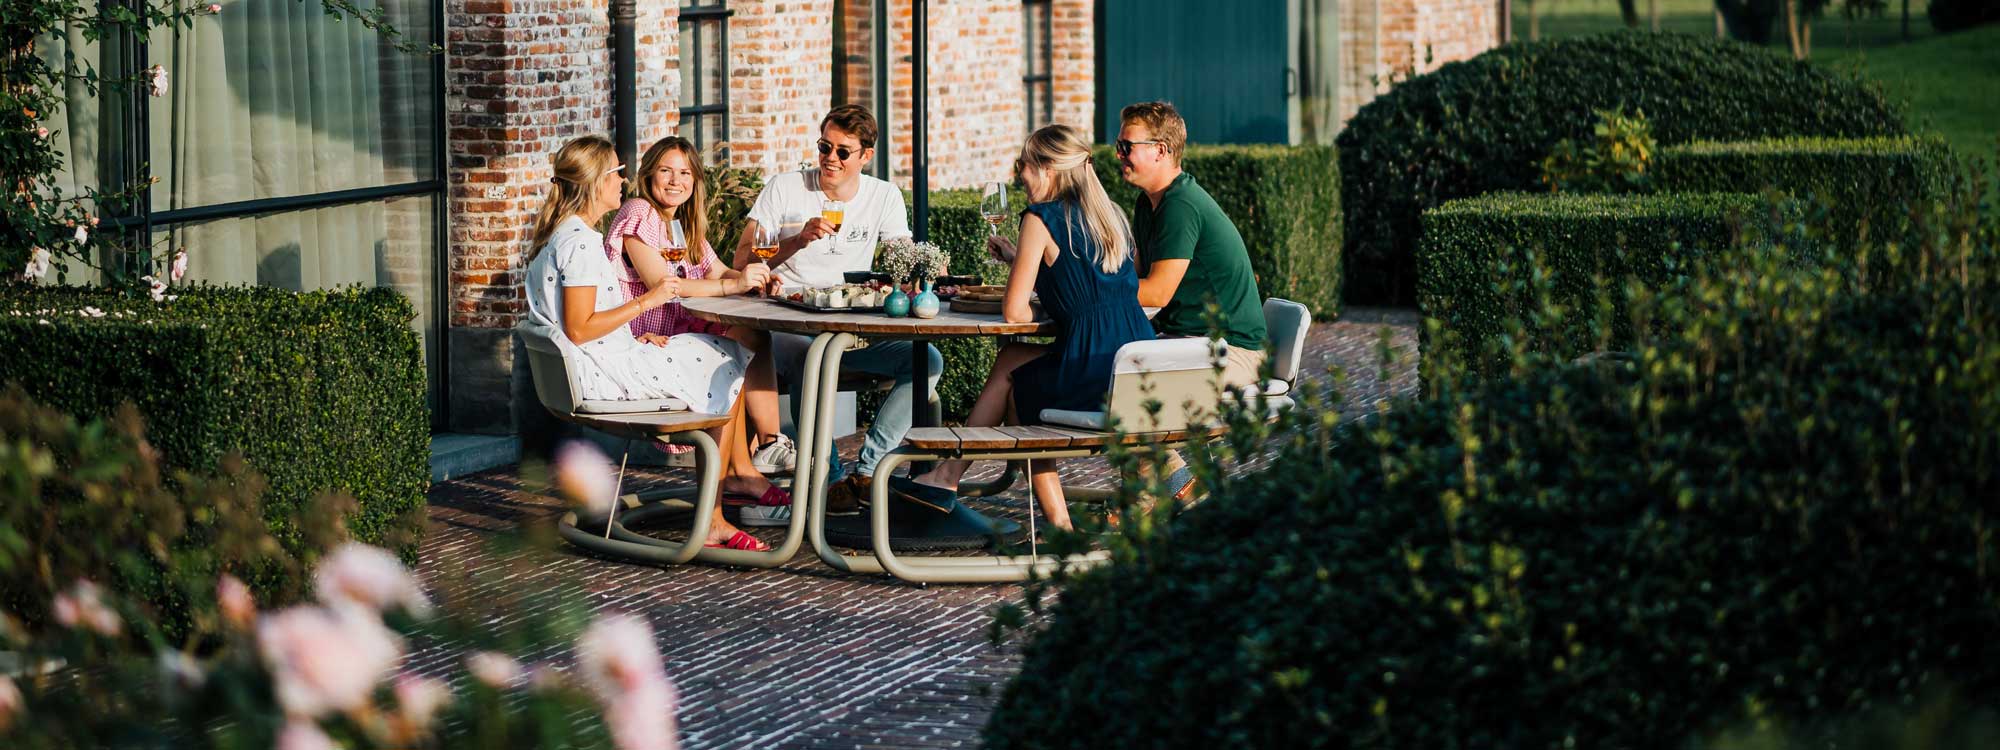 Image of friends sat drinking beers at The Circle round picnic table and benches by Wunder, shown on sunny cobbled floor with old brick building and Buxus shrubs in the background